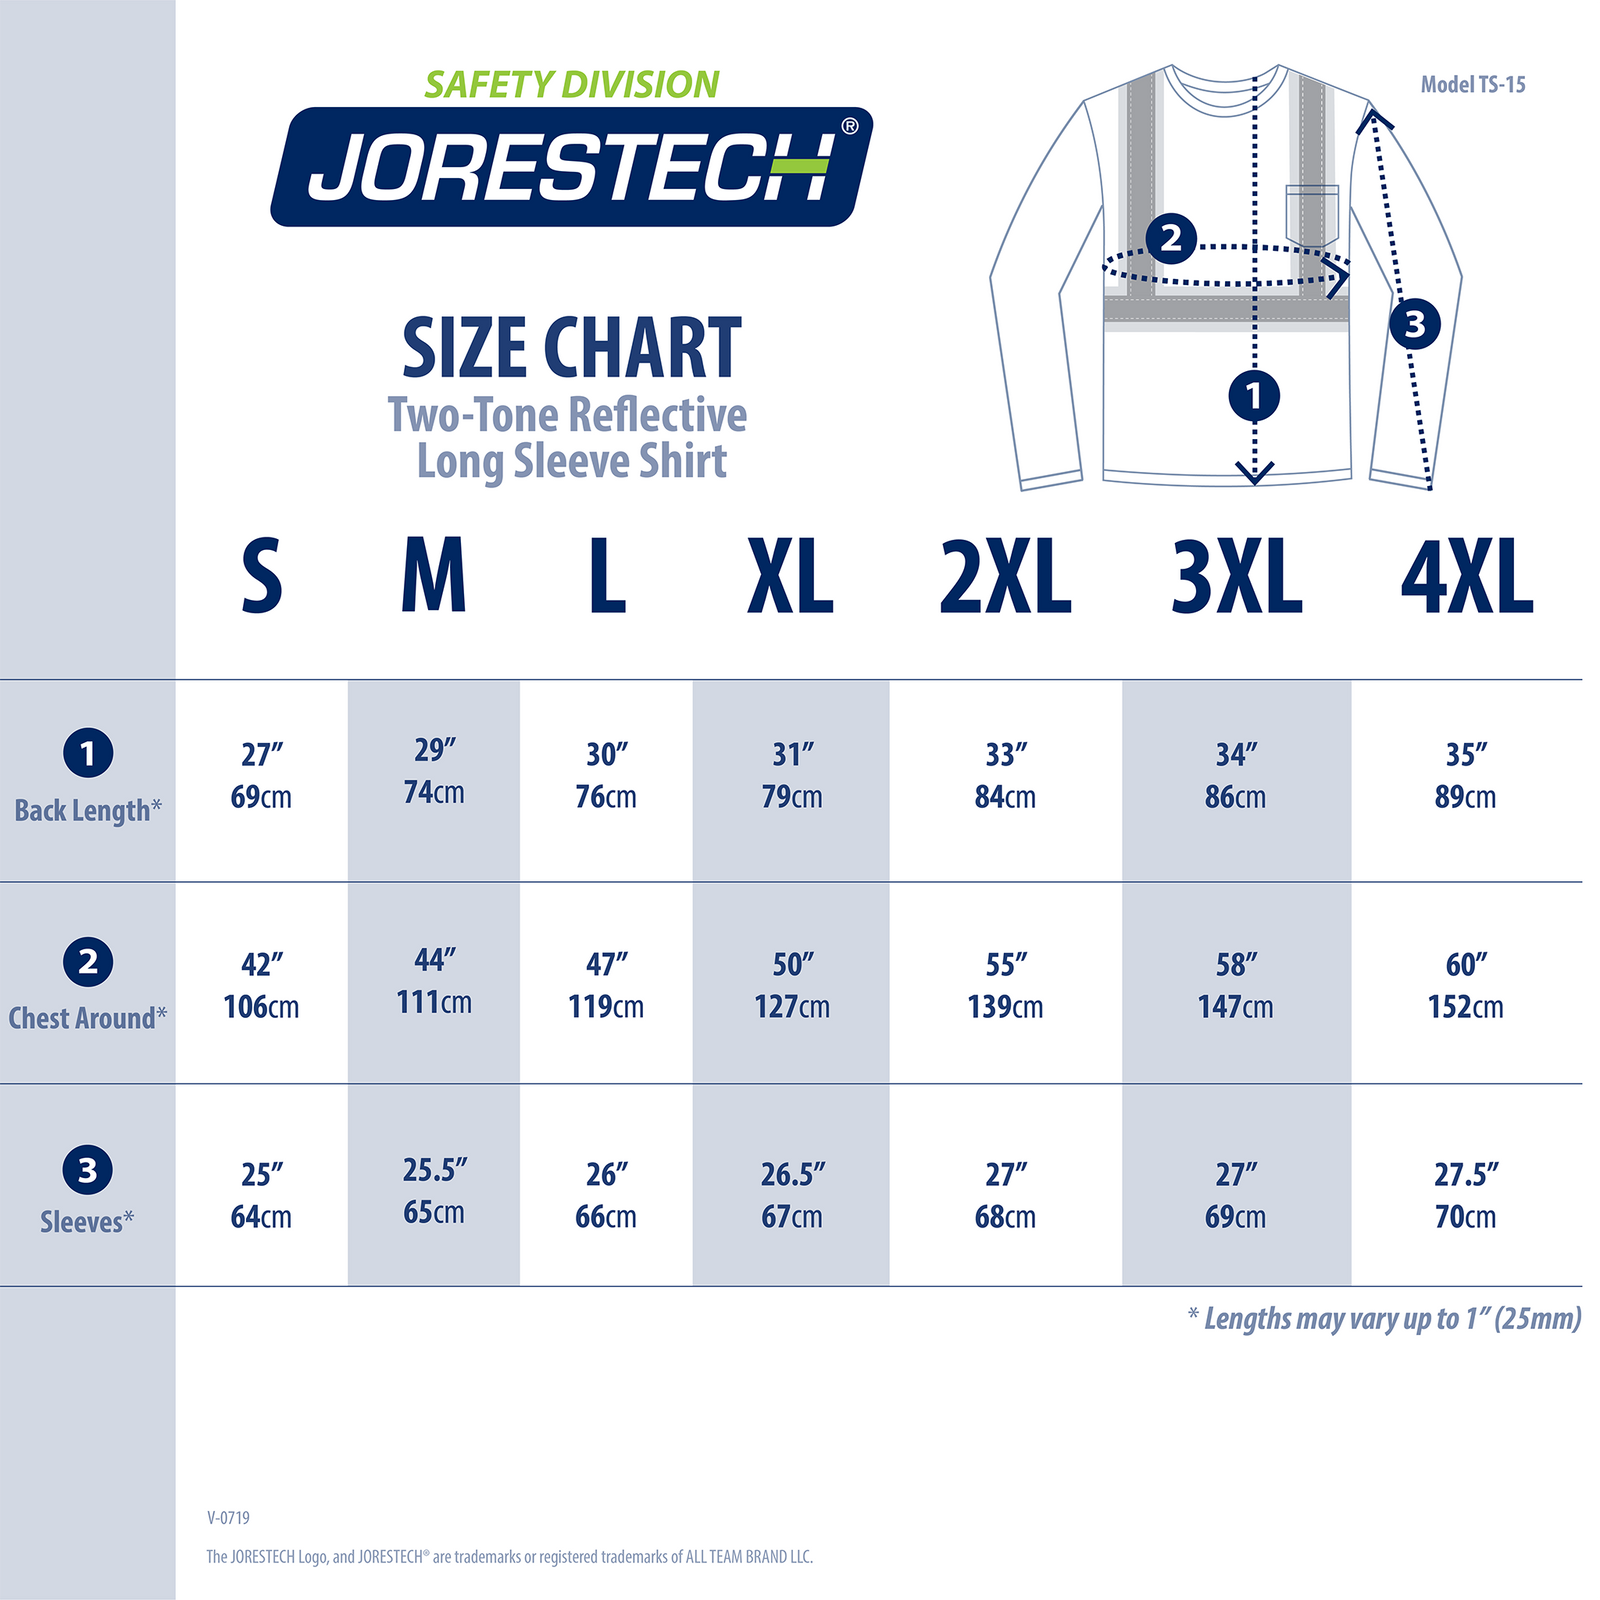 Size chart for the 2 tone long sleeve JORESTECH safety shirt